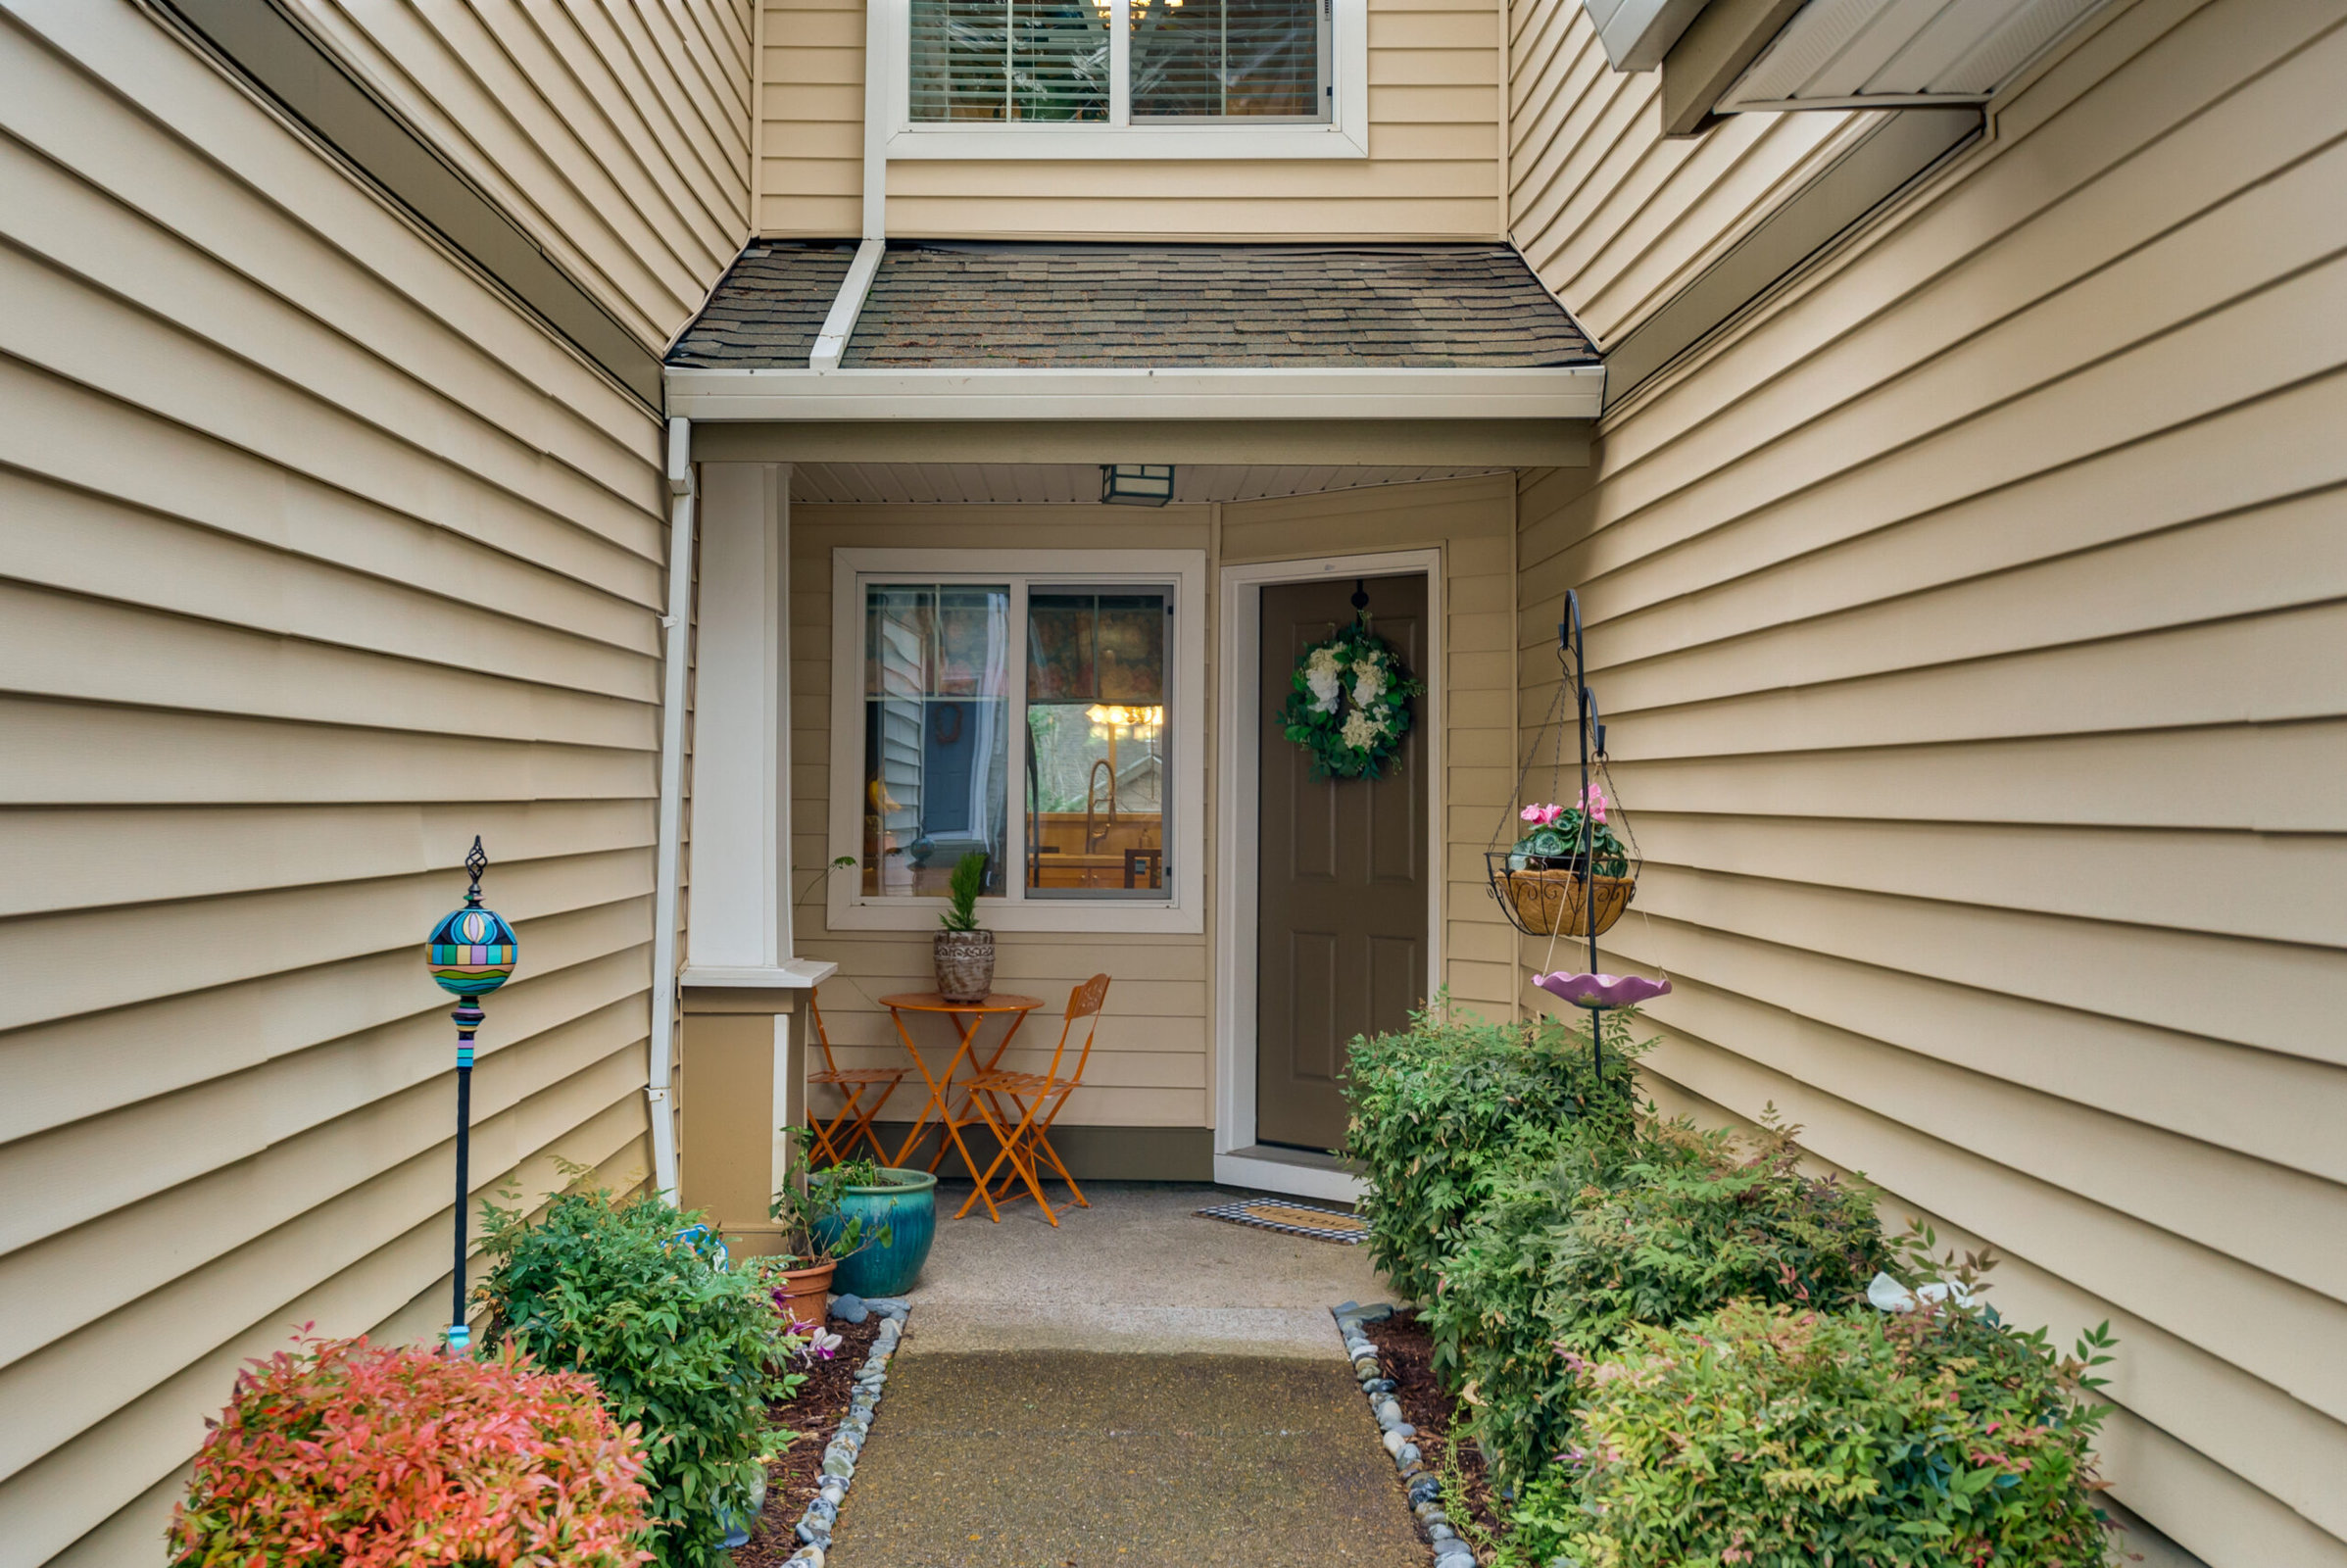 Bright and airy Townhome in Tigard – $415,000